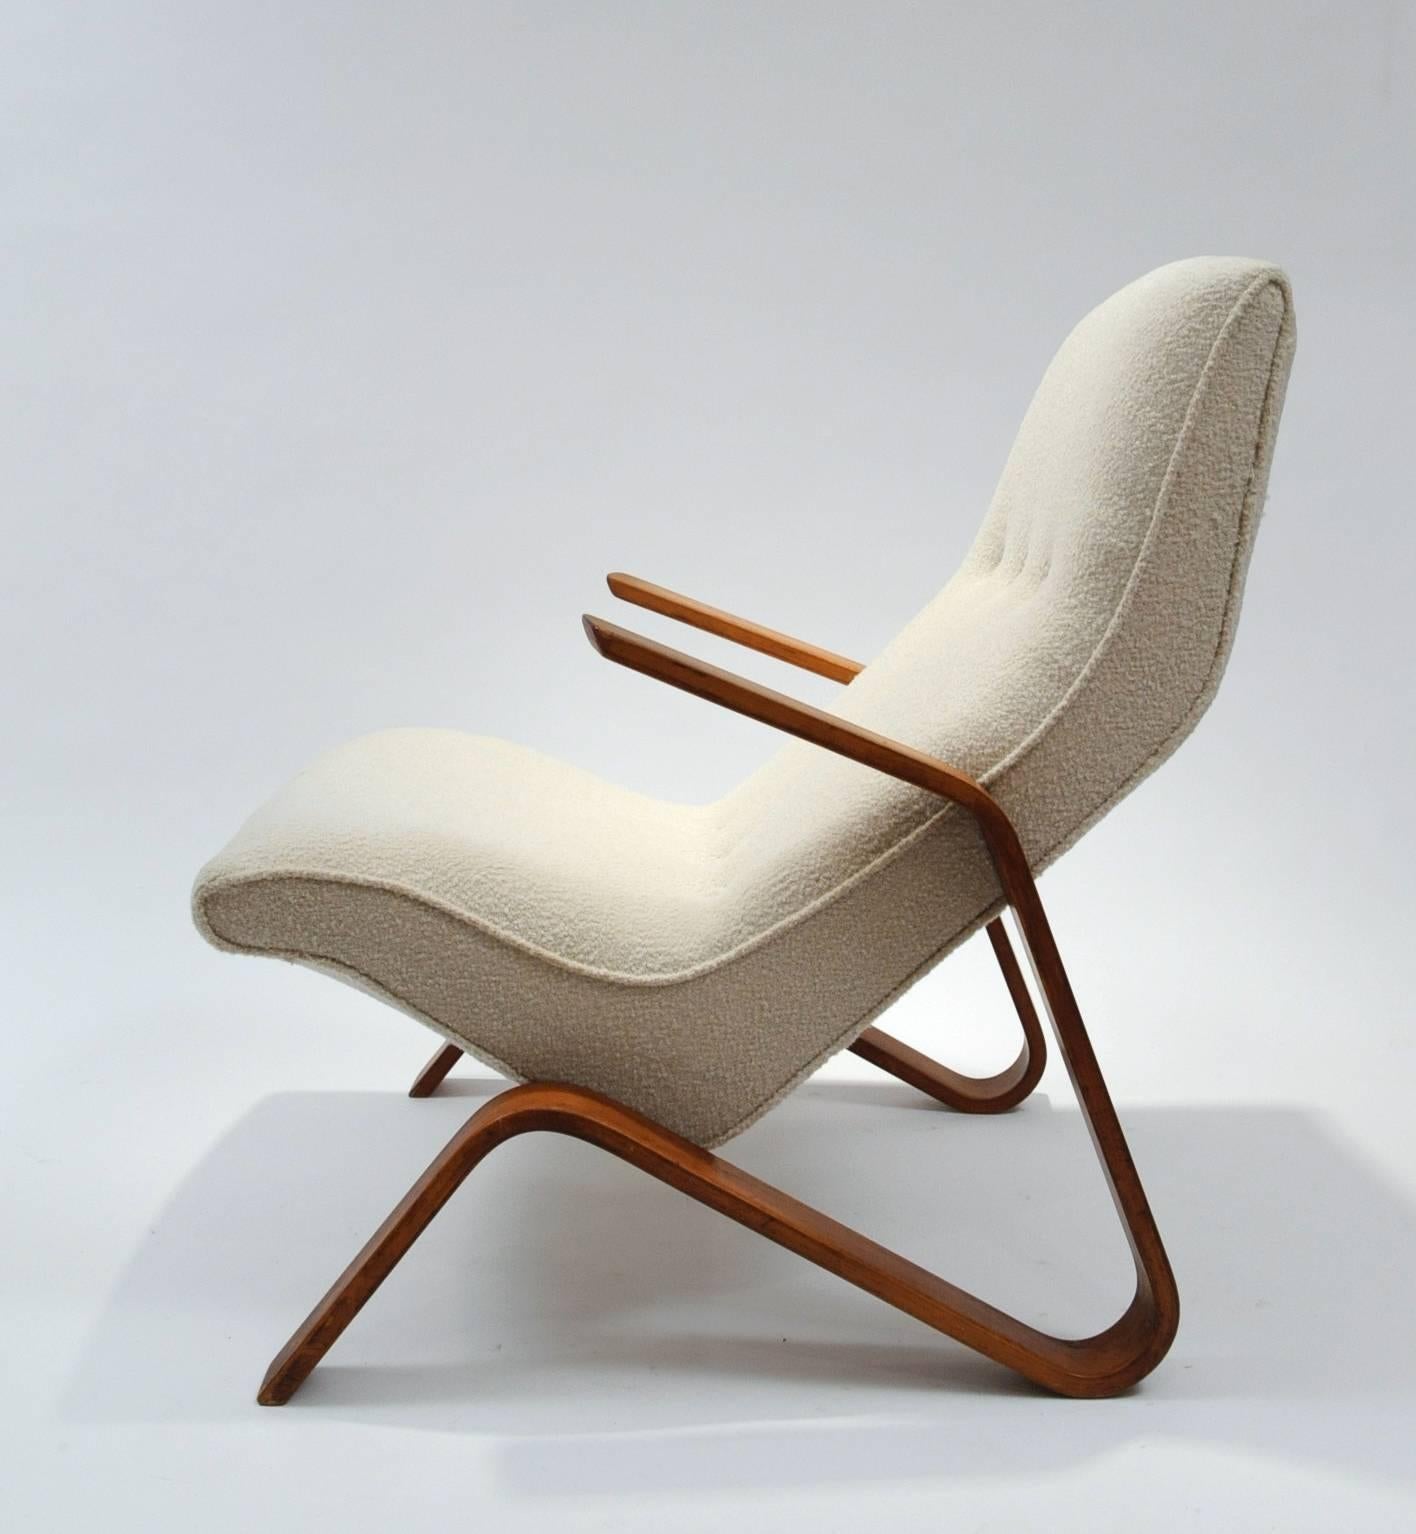 Excellent example of an early Saarinen Grasshopper chair by Knoll. The chair has been professionally reupholstered with bouclé Knoll upholstery. Frame is in excellent condition and retains original patina.